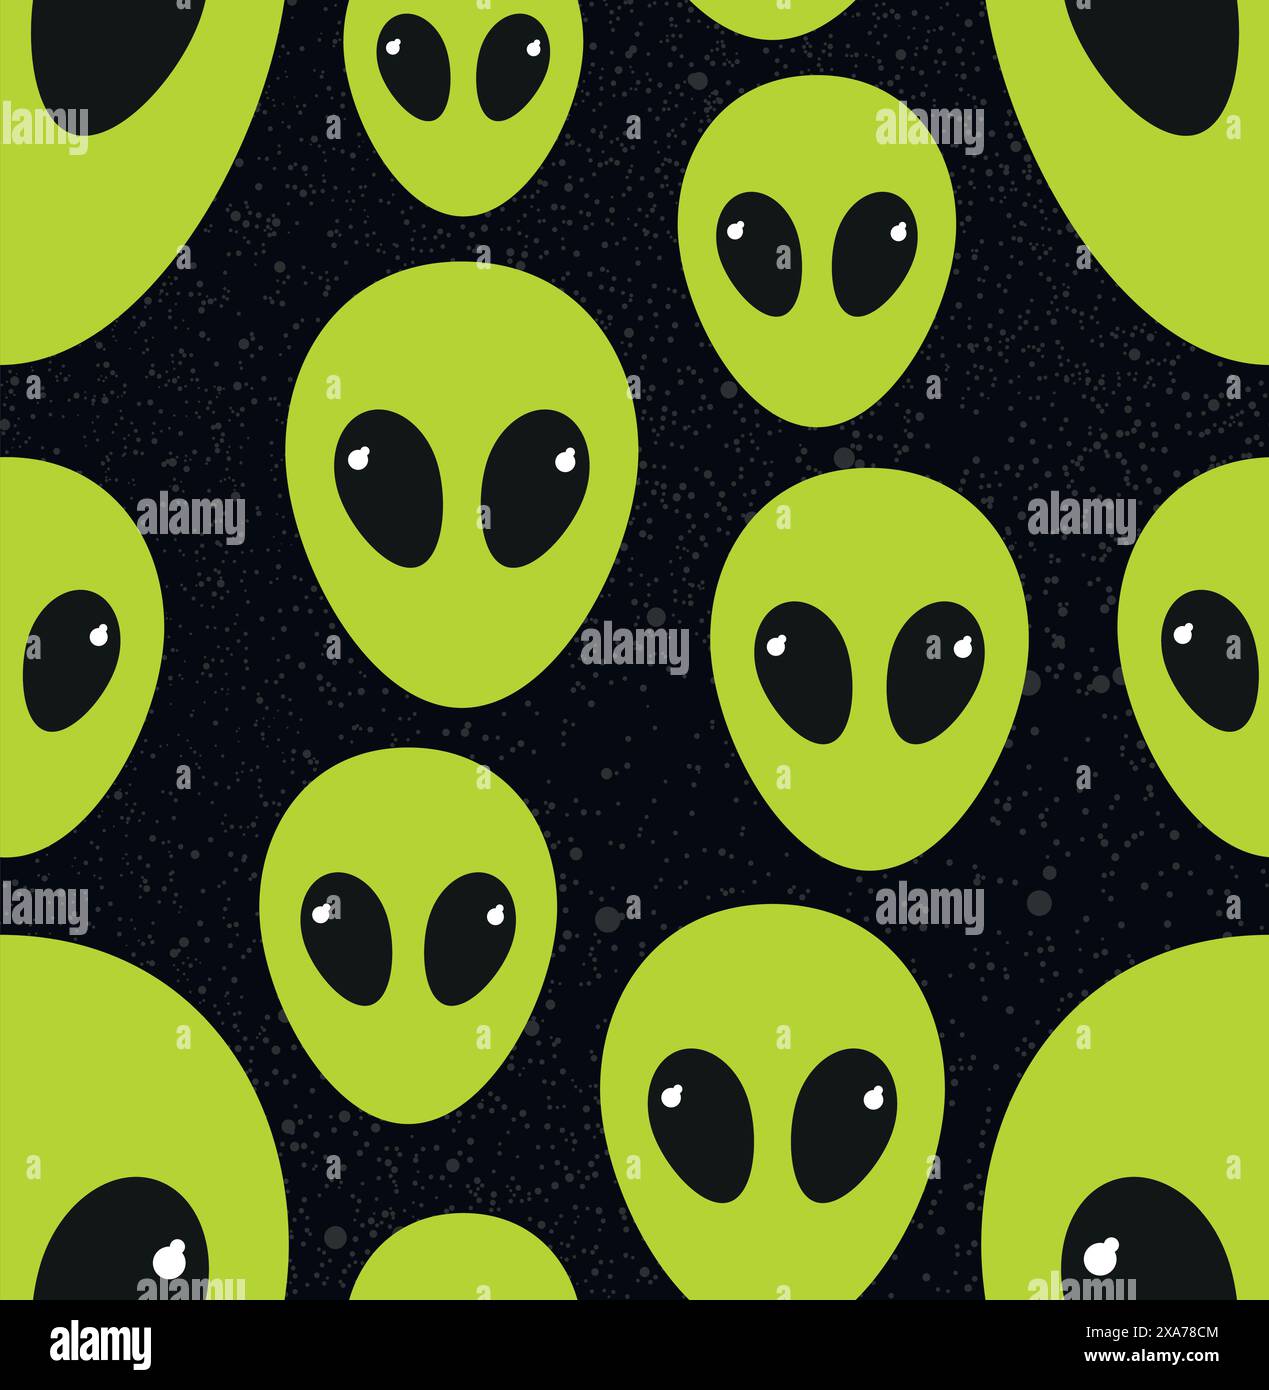 Green alien heads seamless pattern with universe stars background Stock Vector